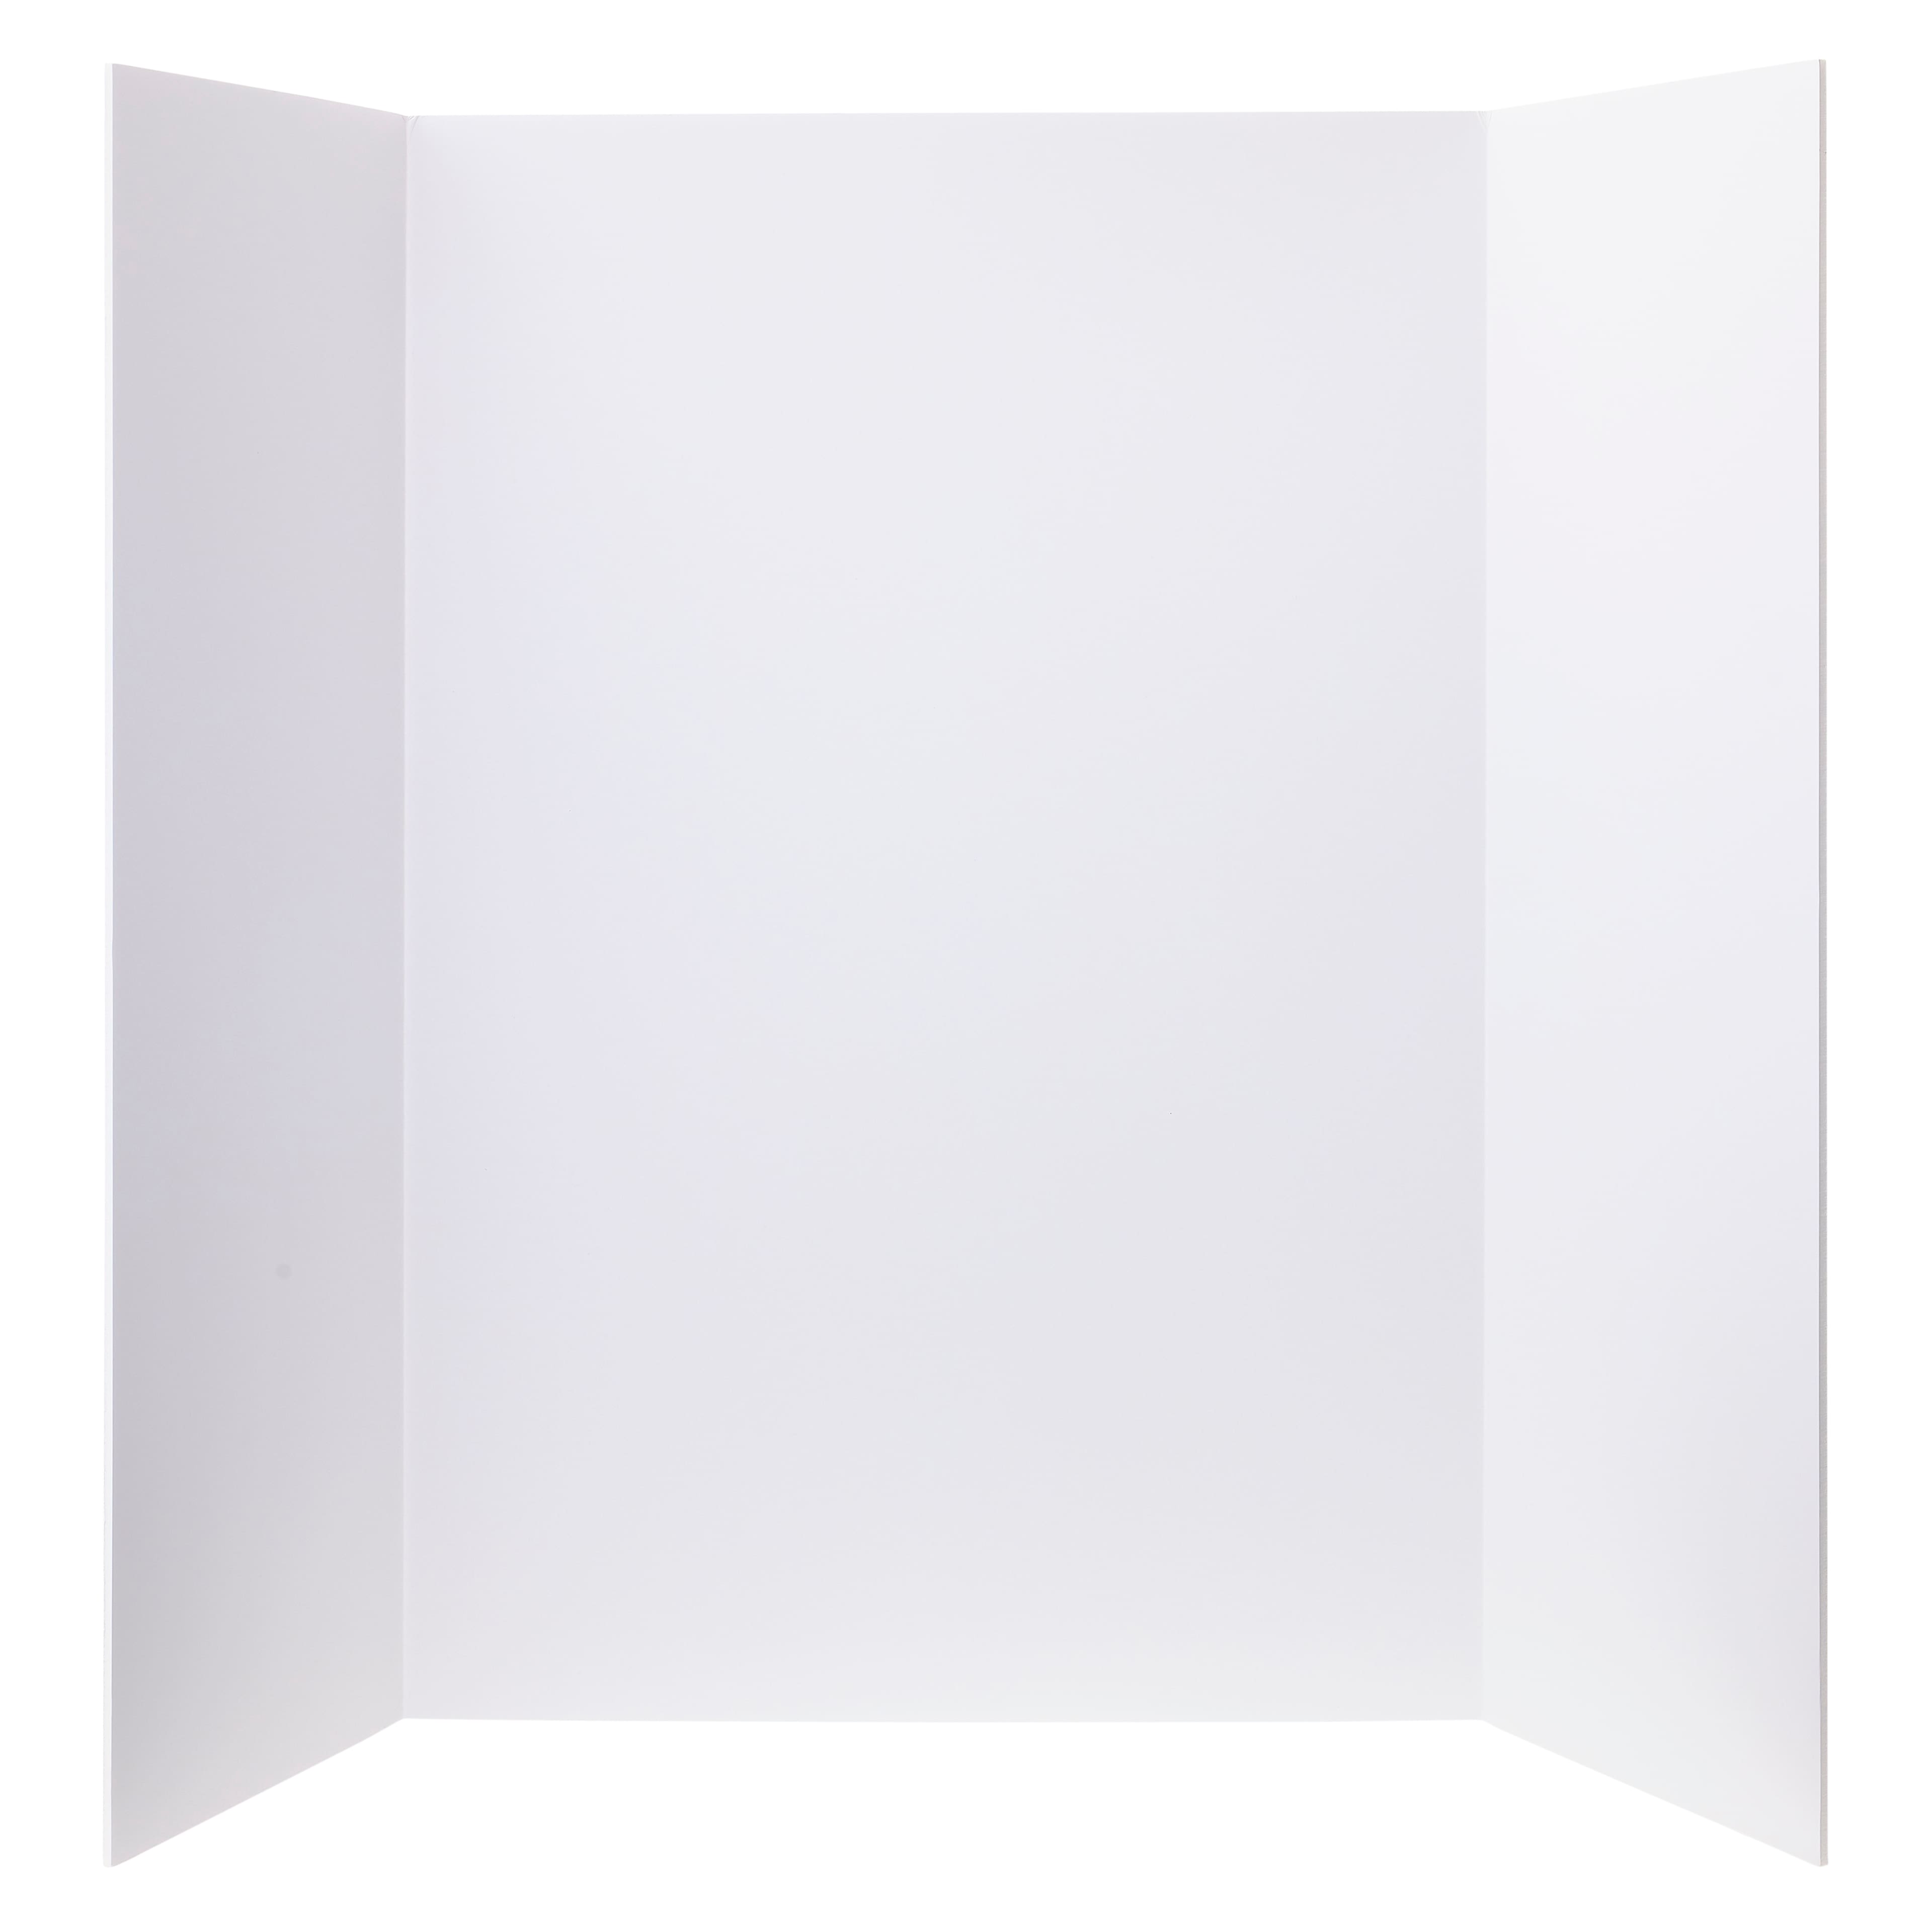 White Foam Board Close Up, Packaging Material. Stock Photo